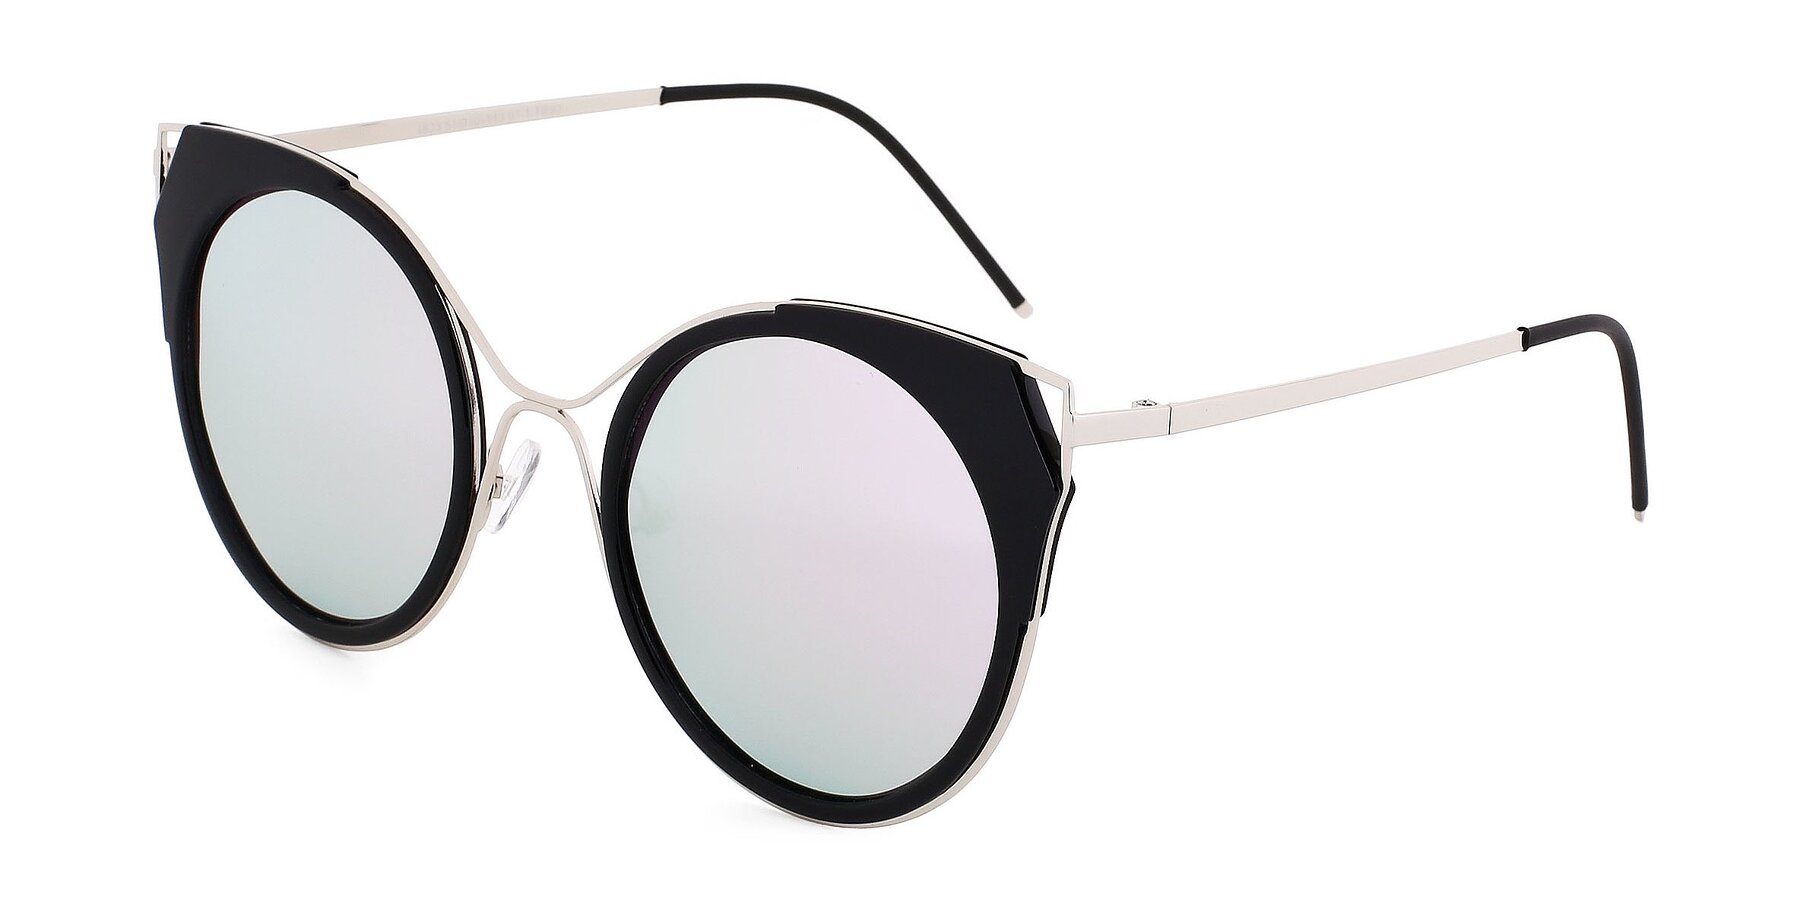 Black-Silver Lightweight Round Cat-Eye Mirrored Polarized Sunglasses with Silver Non-Rx Tac Sun Lenses